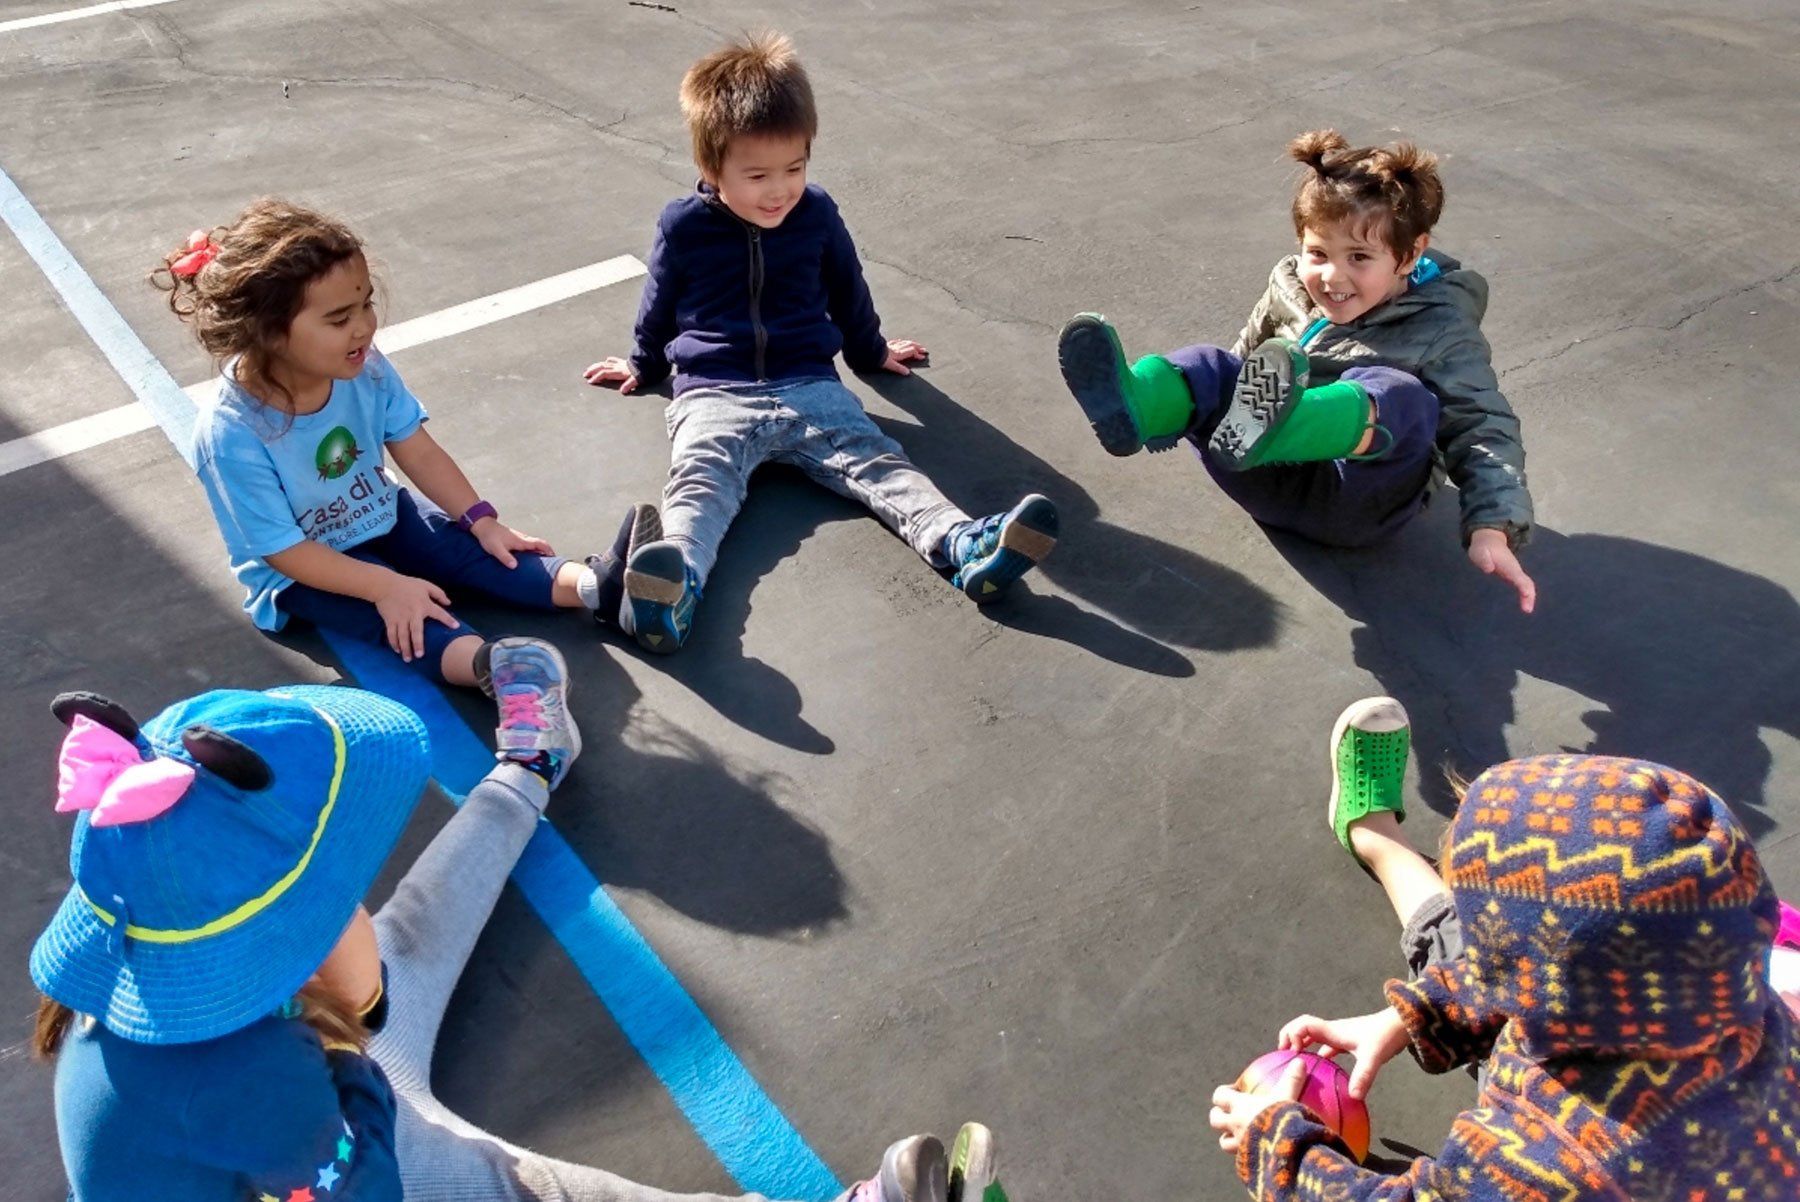 Primary students gathered during outdoor play time